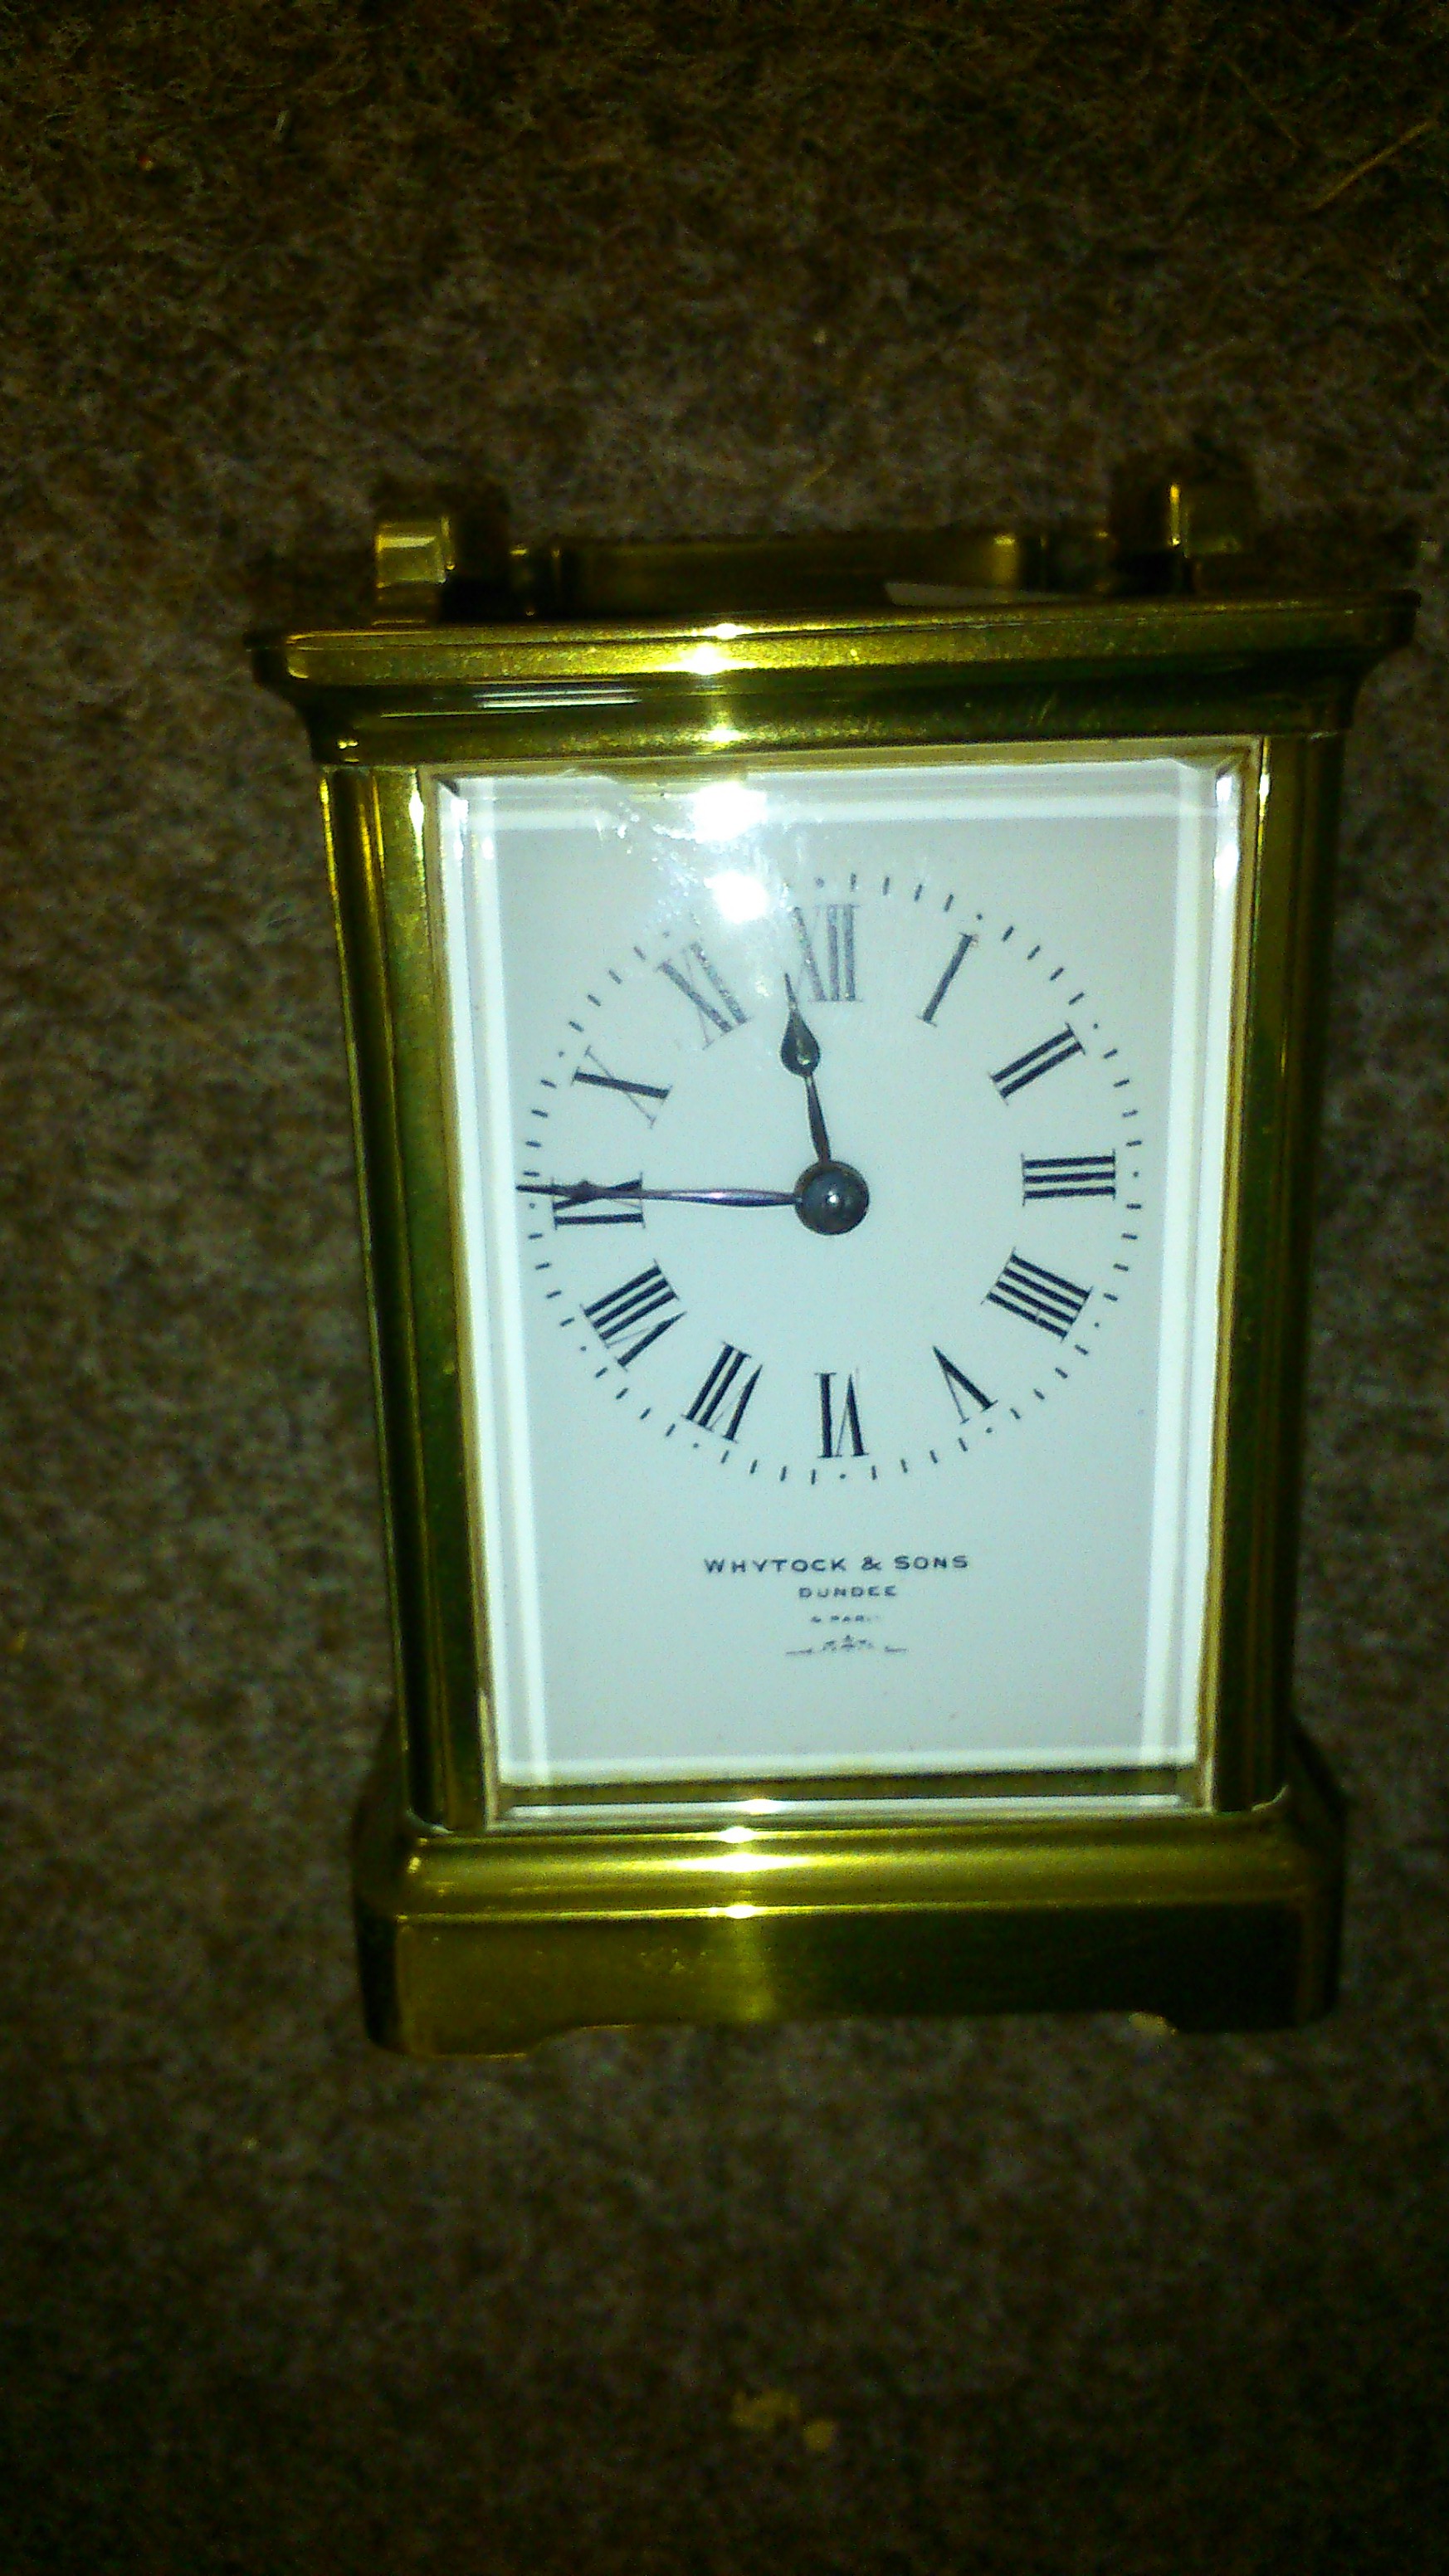 Whytock and Son Dundee Carriage clock